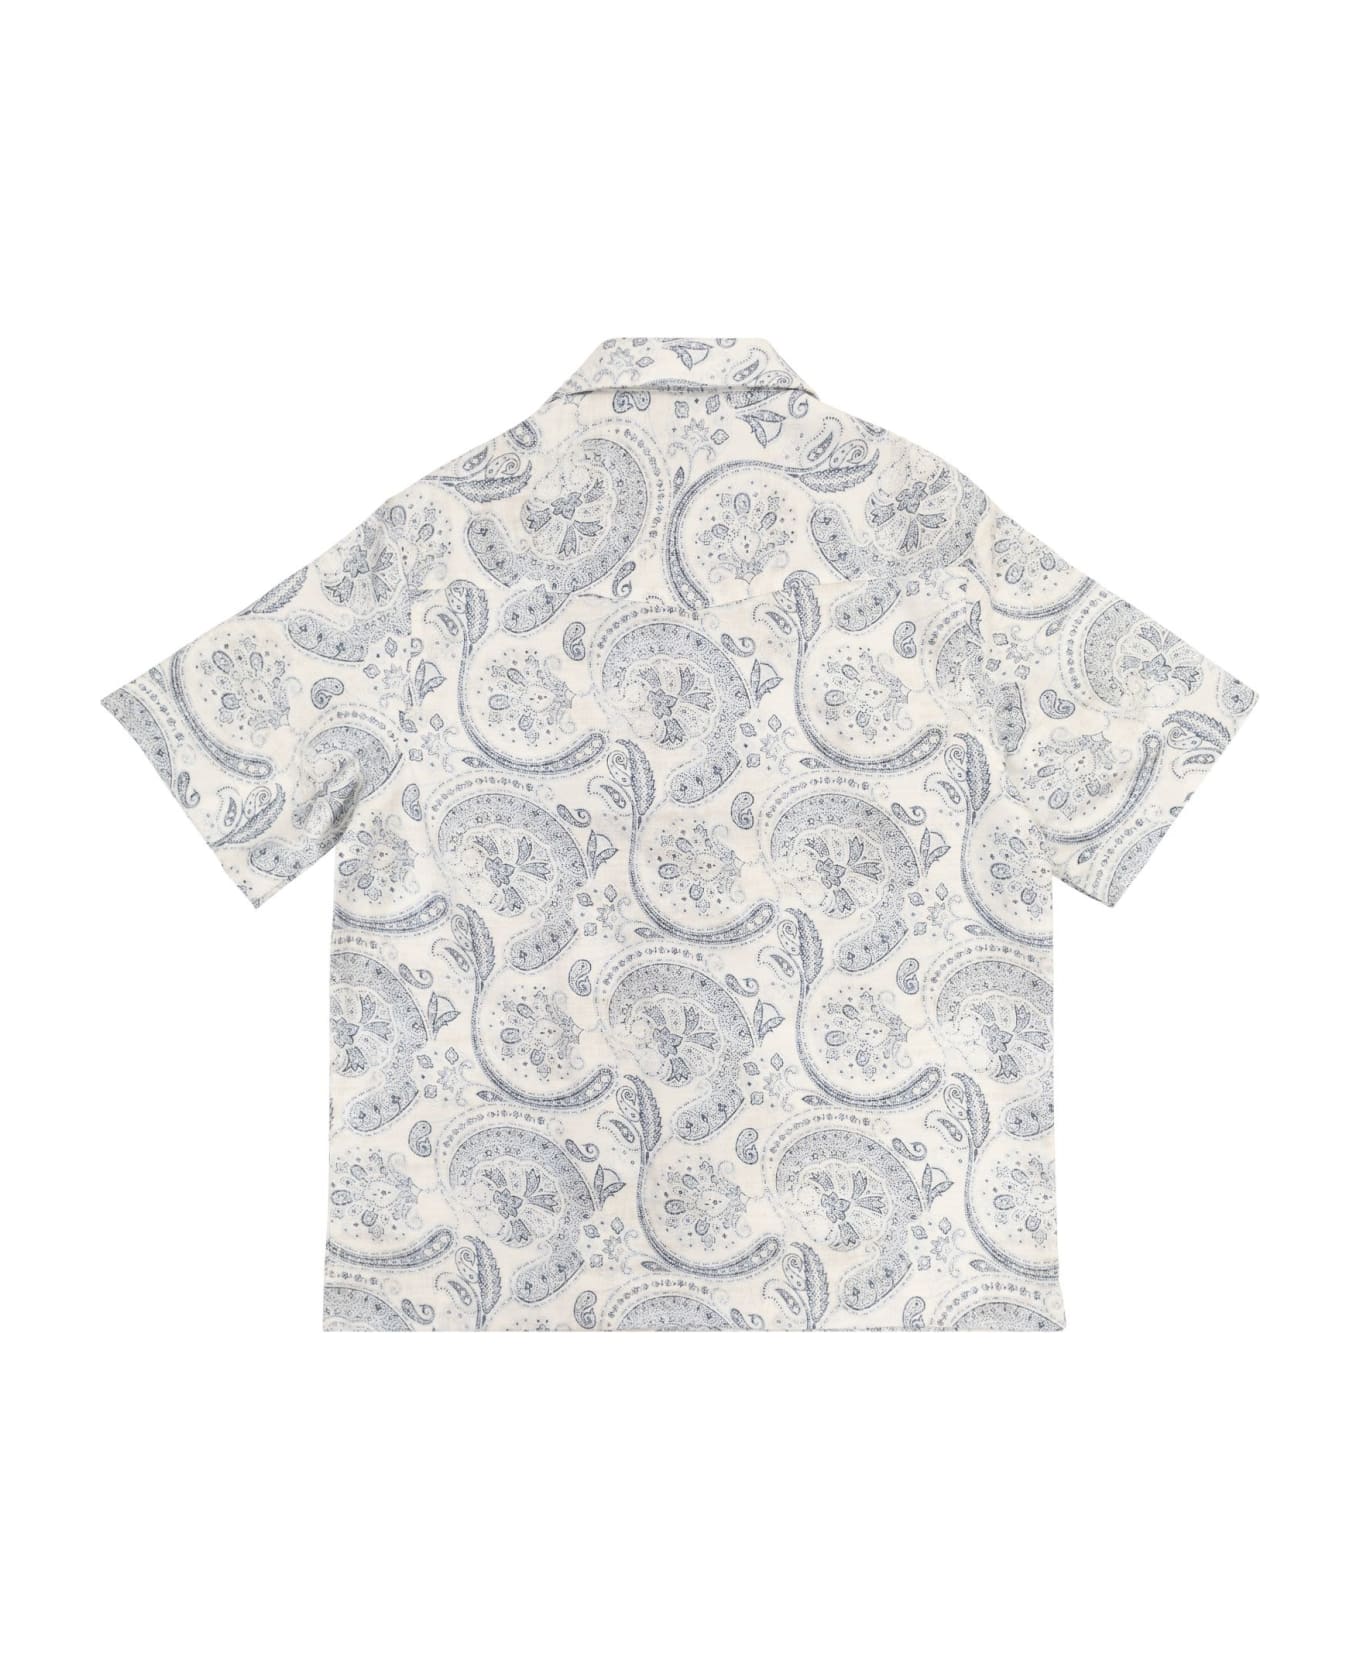 Brunello Cucinelli Paisley Print Linen Short-sleeved Shirt With Camp Collar - White/blue